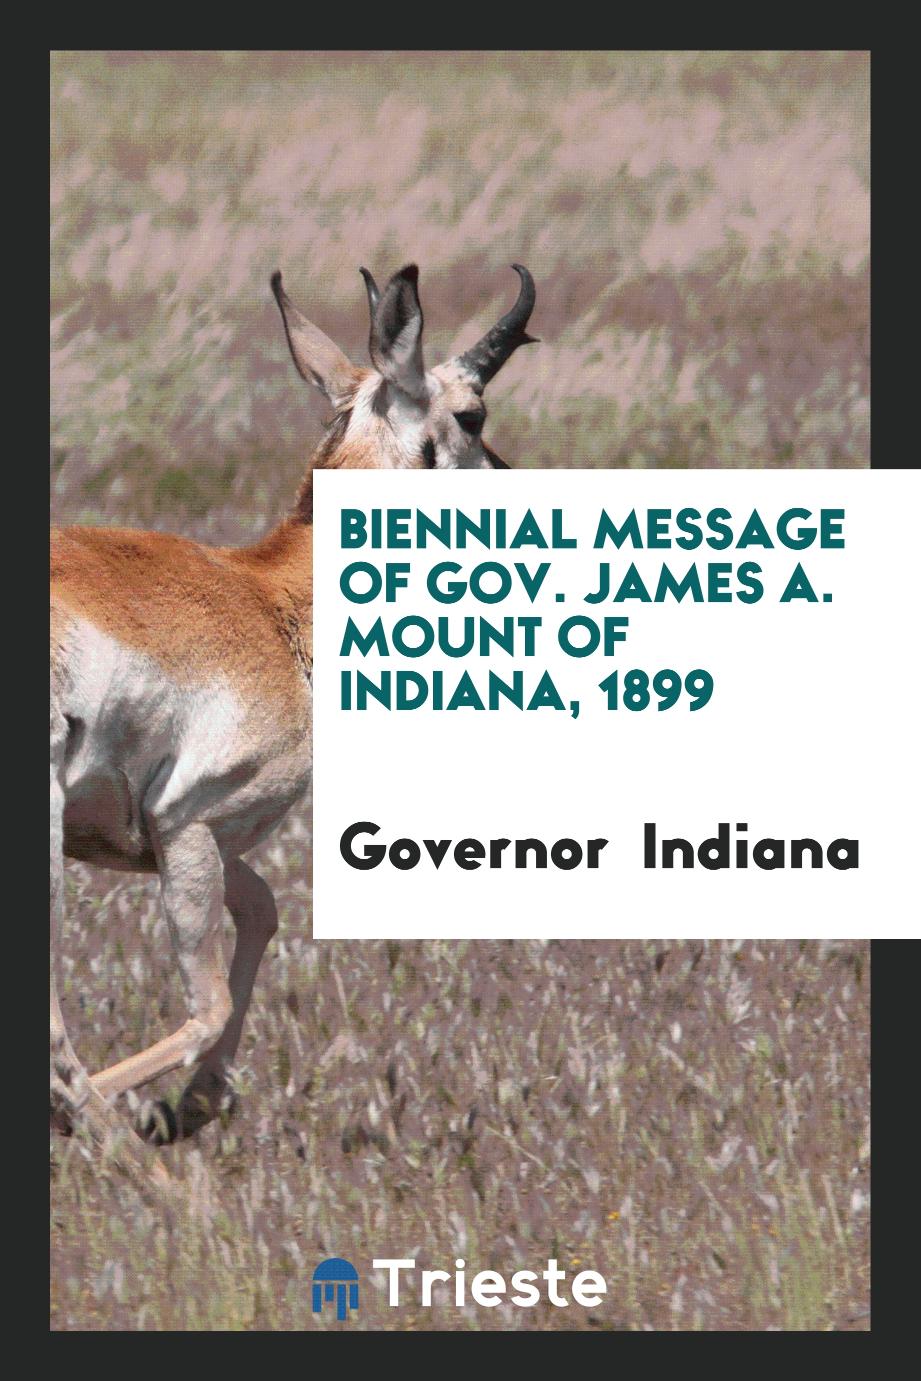 Biennial Message of Gov. James A. Mount of Indiana, 1899